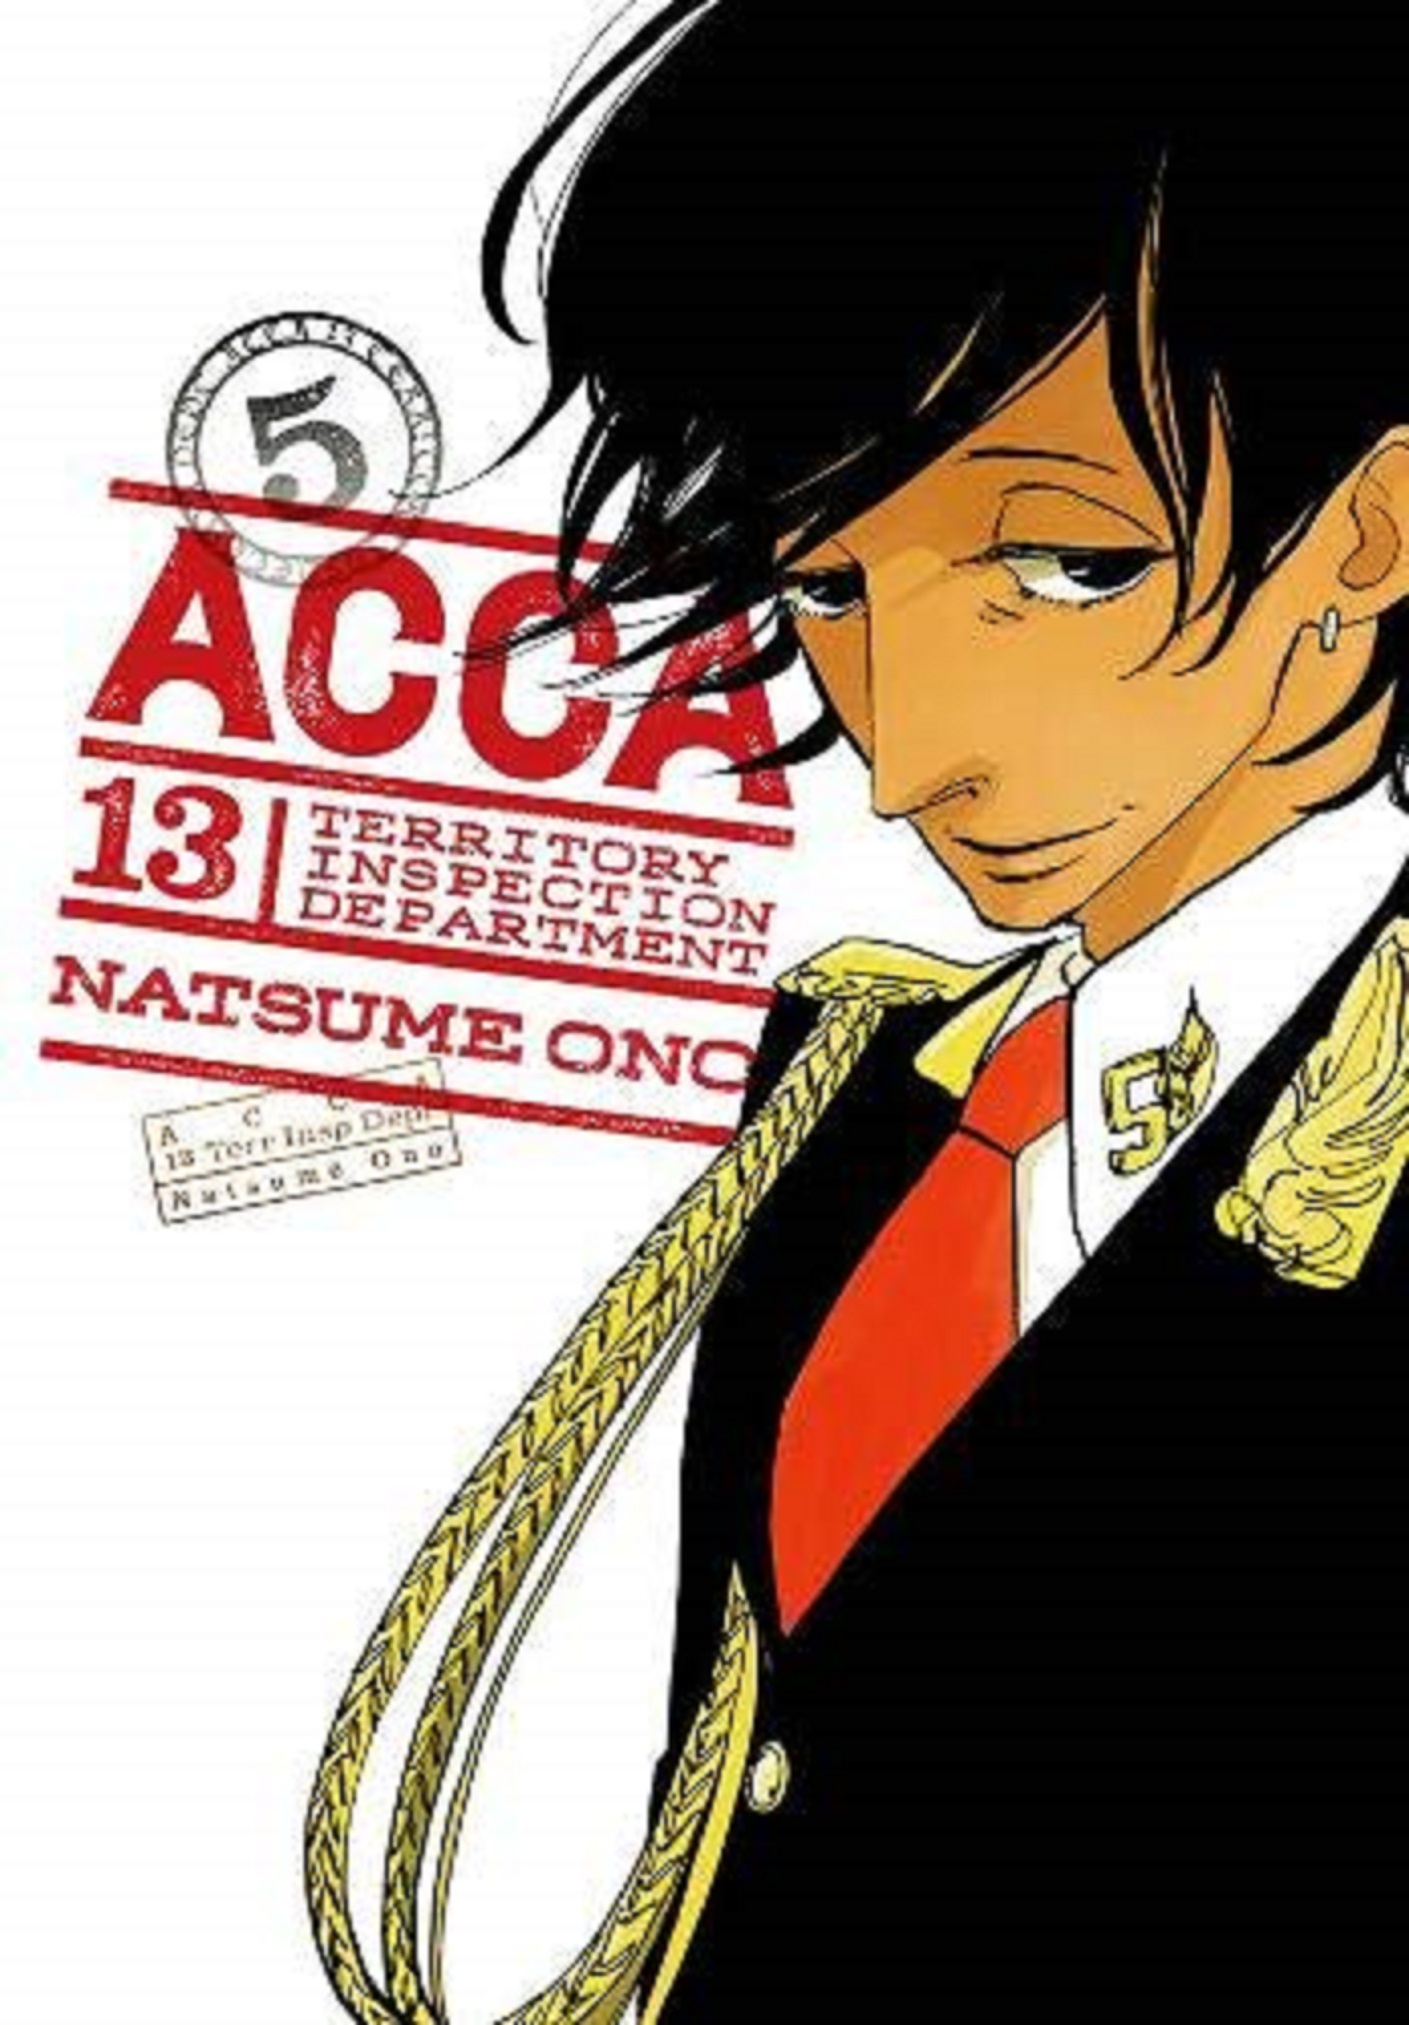 Acca 13-territory Inspection Department, Volume 5